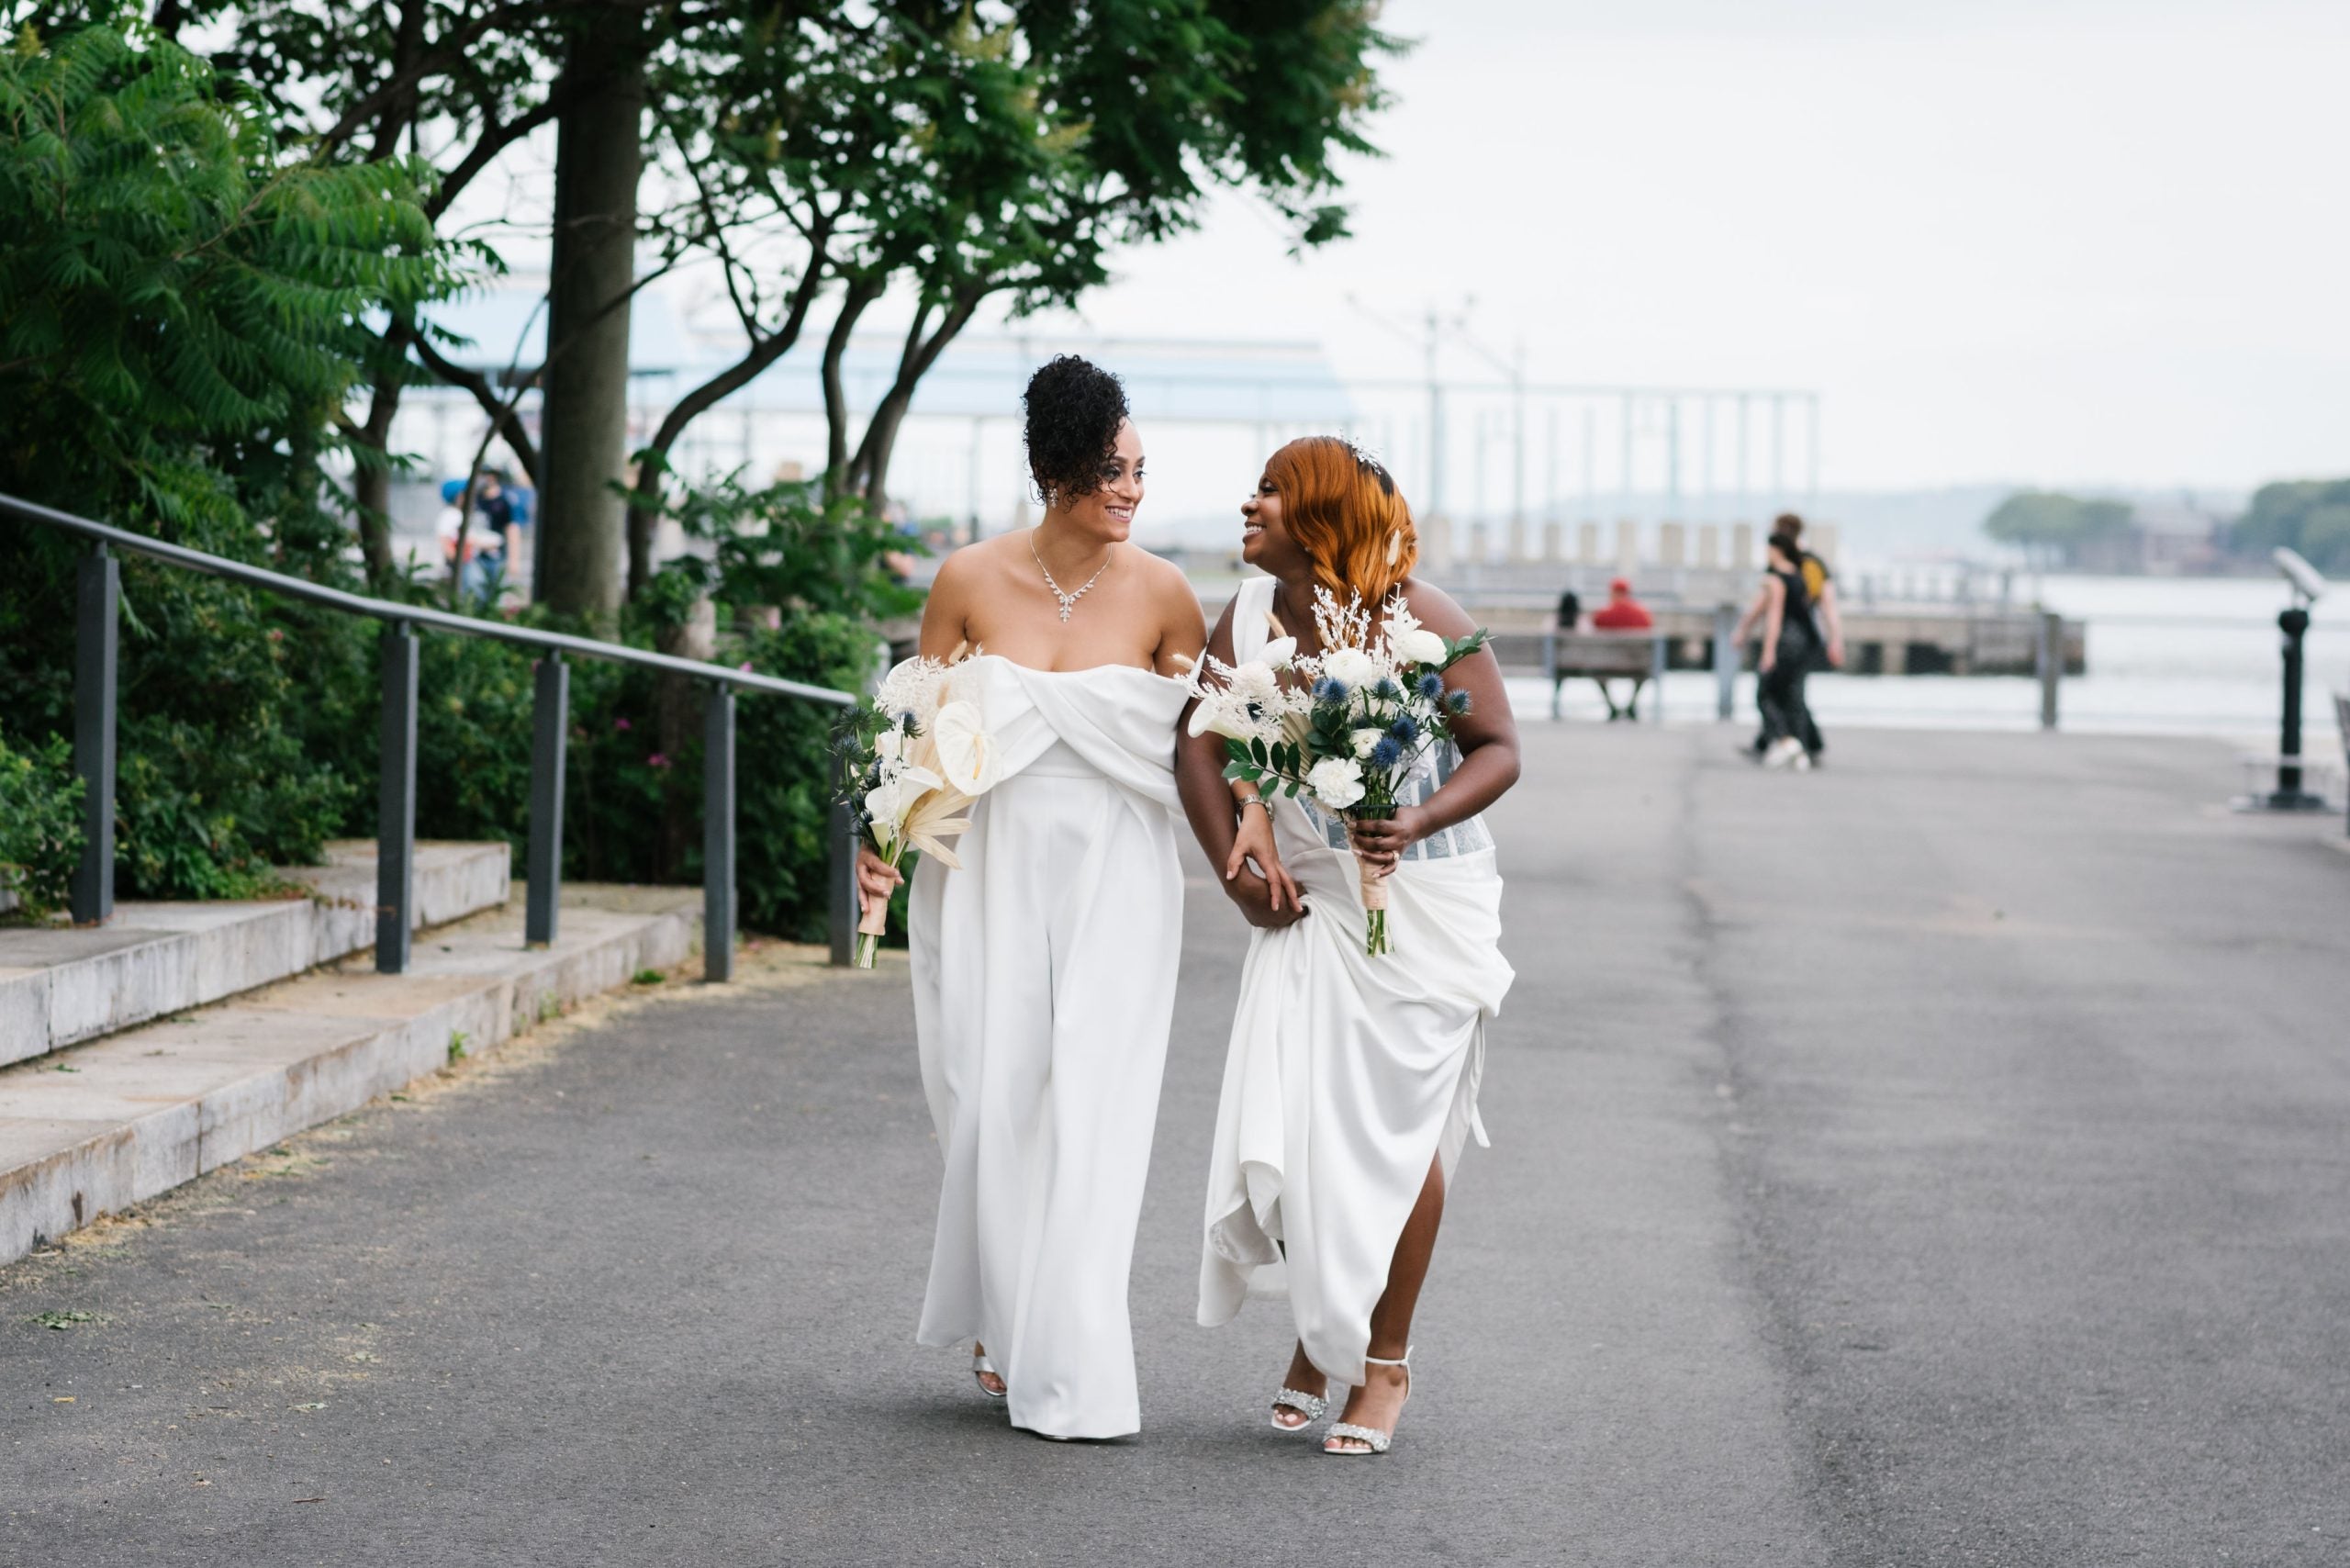 Bridal Bliss: After Proposing To Each Other A Week Apart, Ayanna & Sully Eloped In A Park In Brooklyn